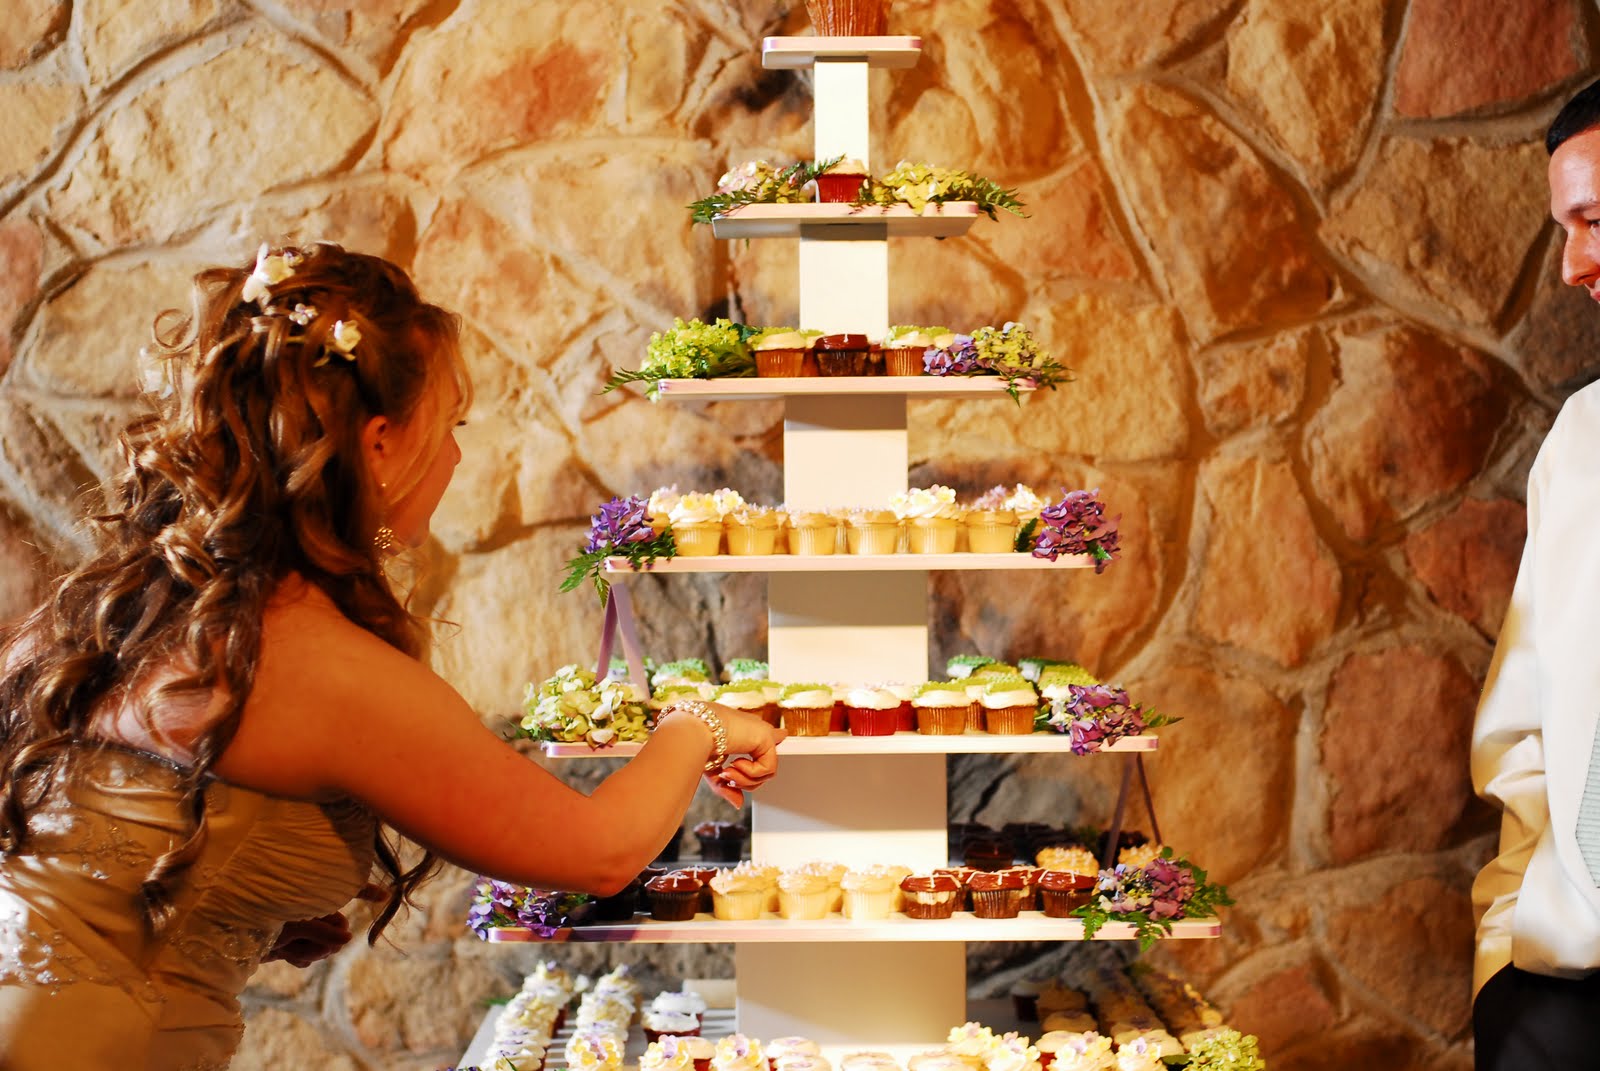 Wedding: Tower Of Cupcakes